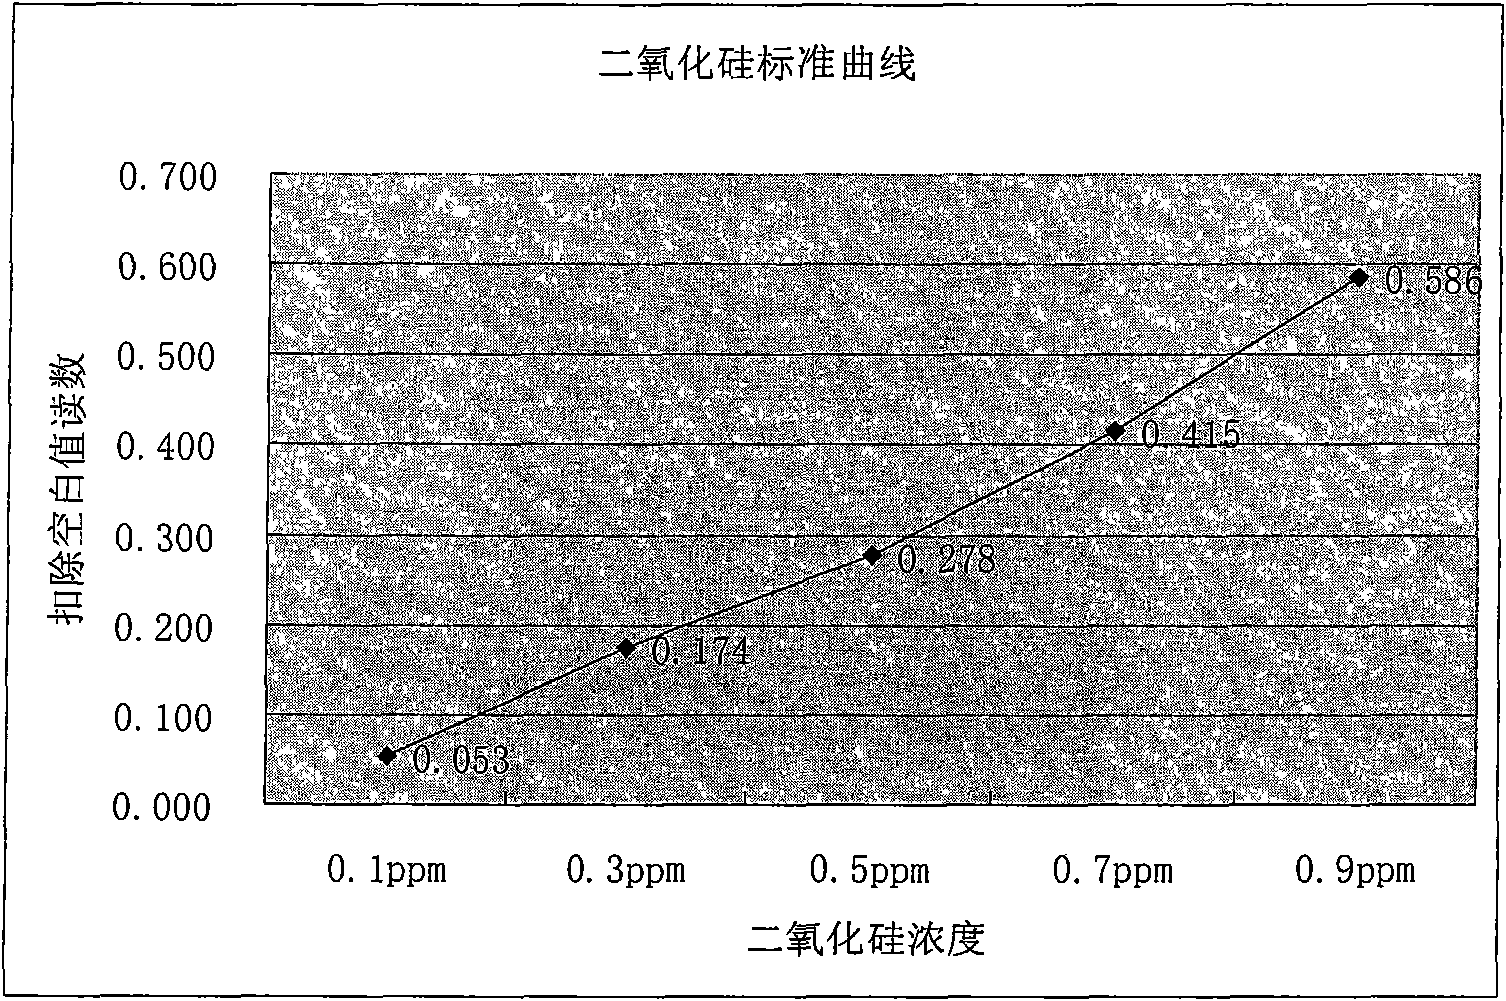 Method for measuring silicon dioxide content in solution